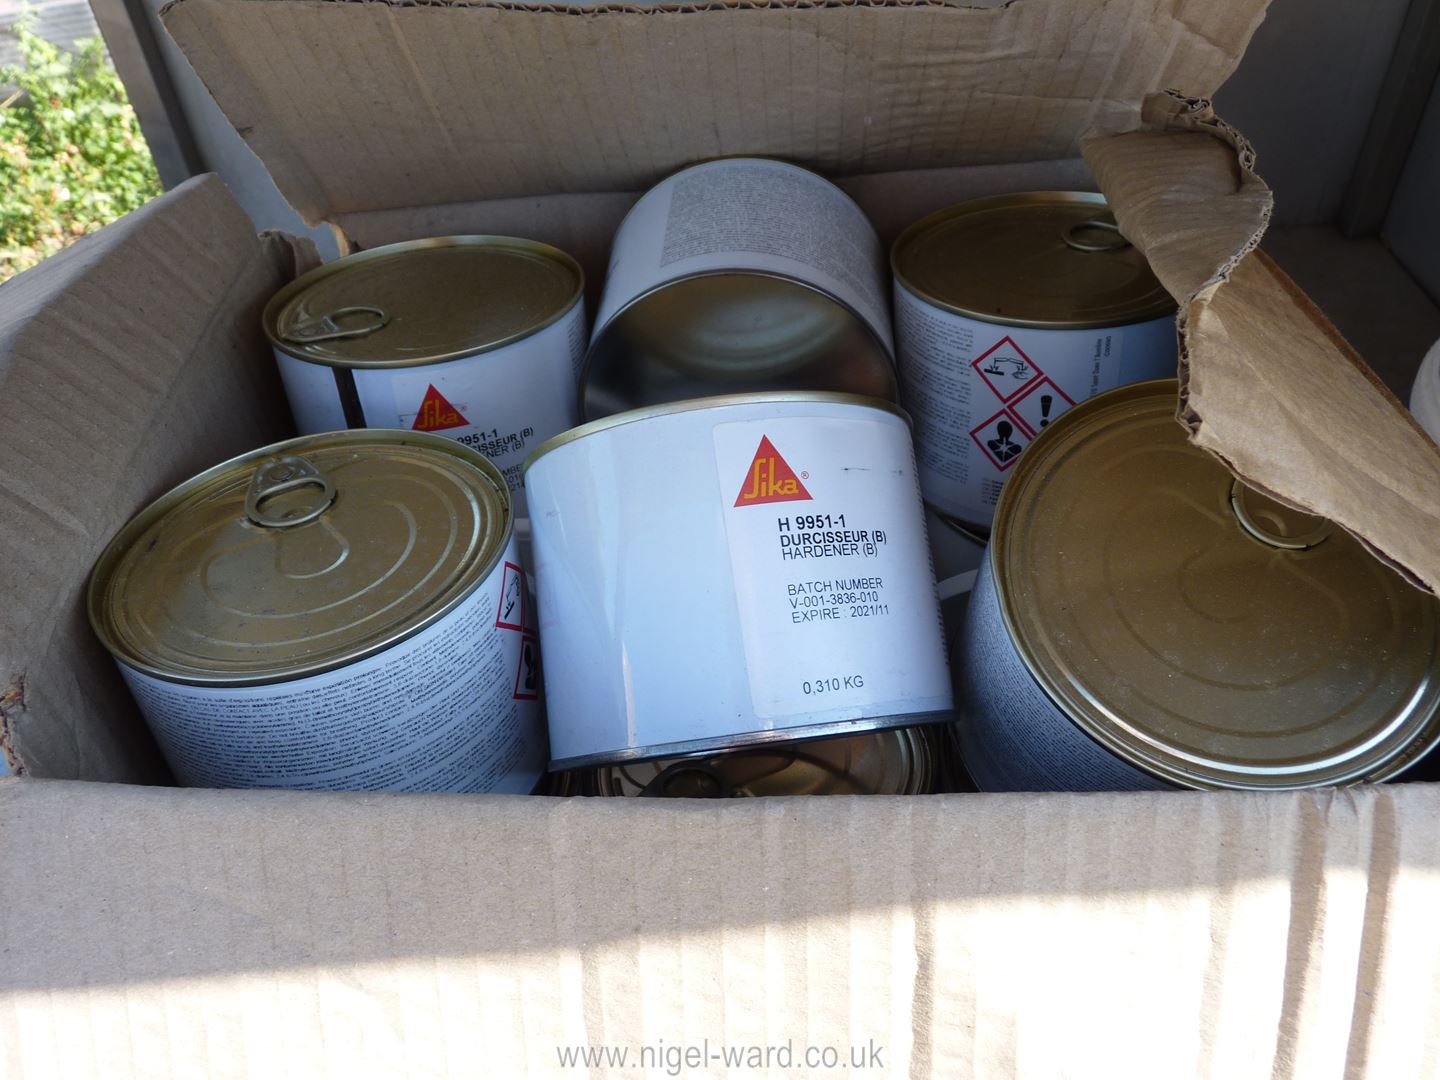 A quantity of 'Sika' Sikalastic, Sikacor, mastic wall tile filler, etc. - Image 6 of 11